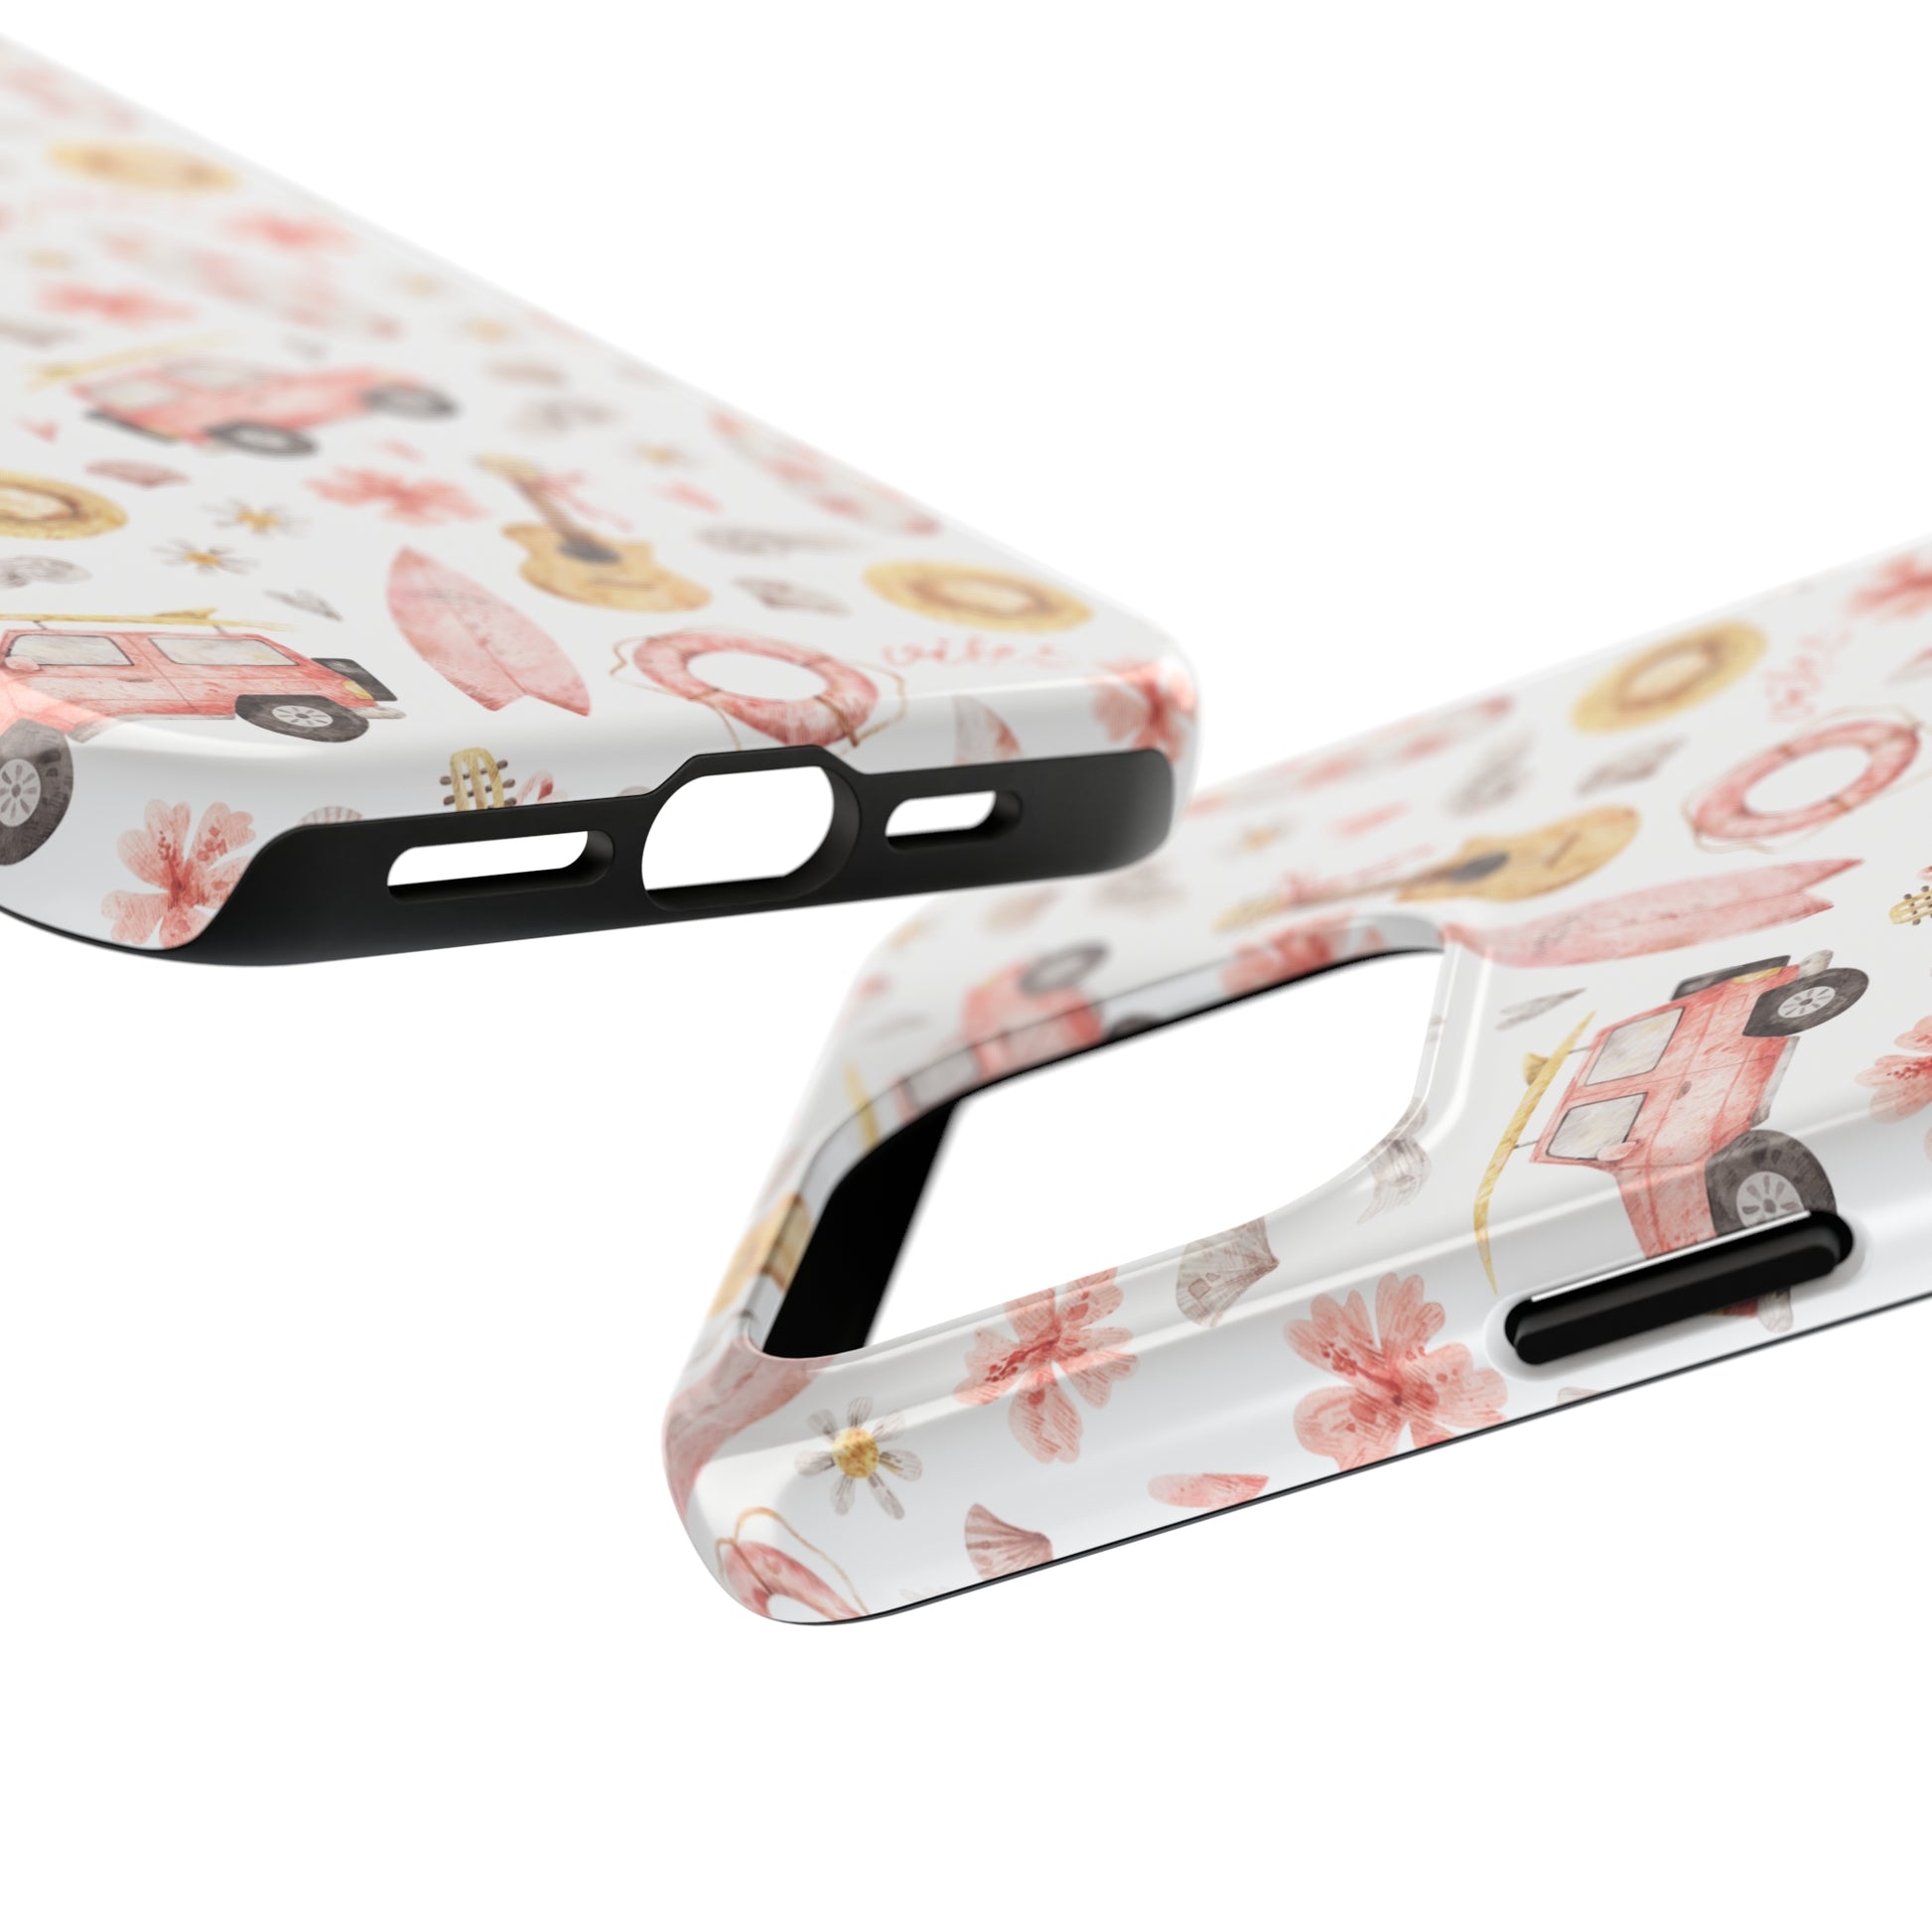 Beachside Vibes - Phone Case For